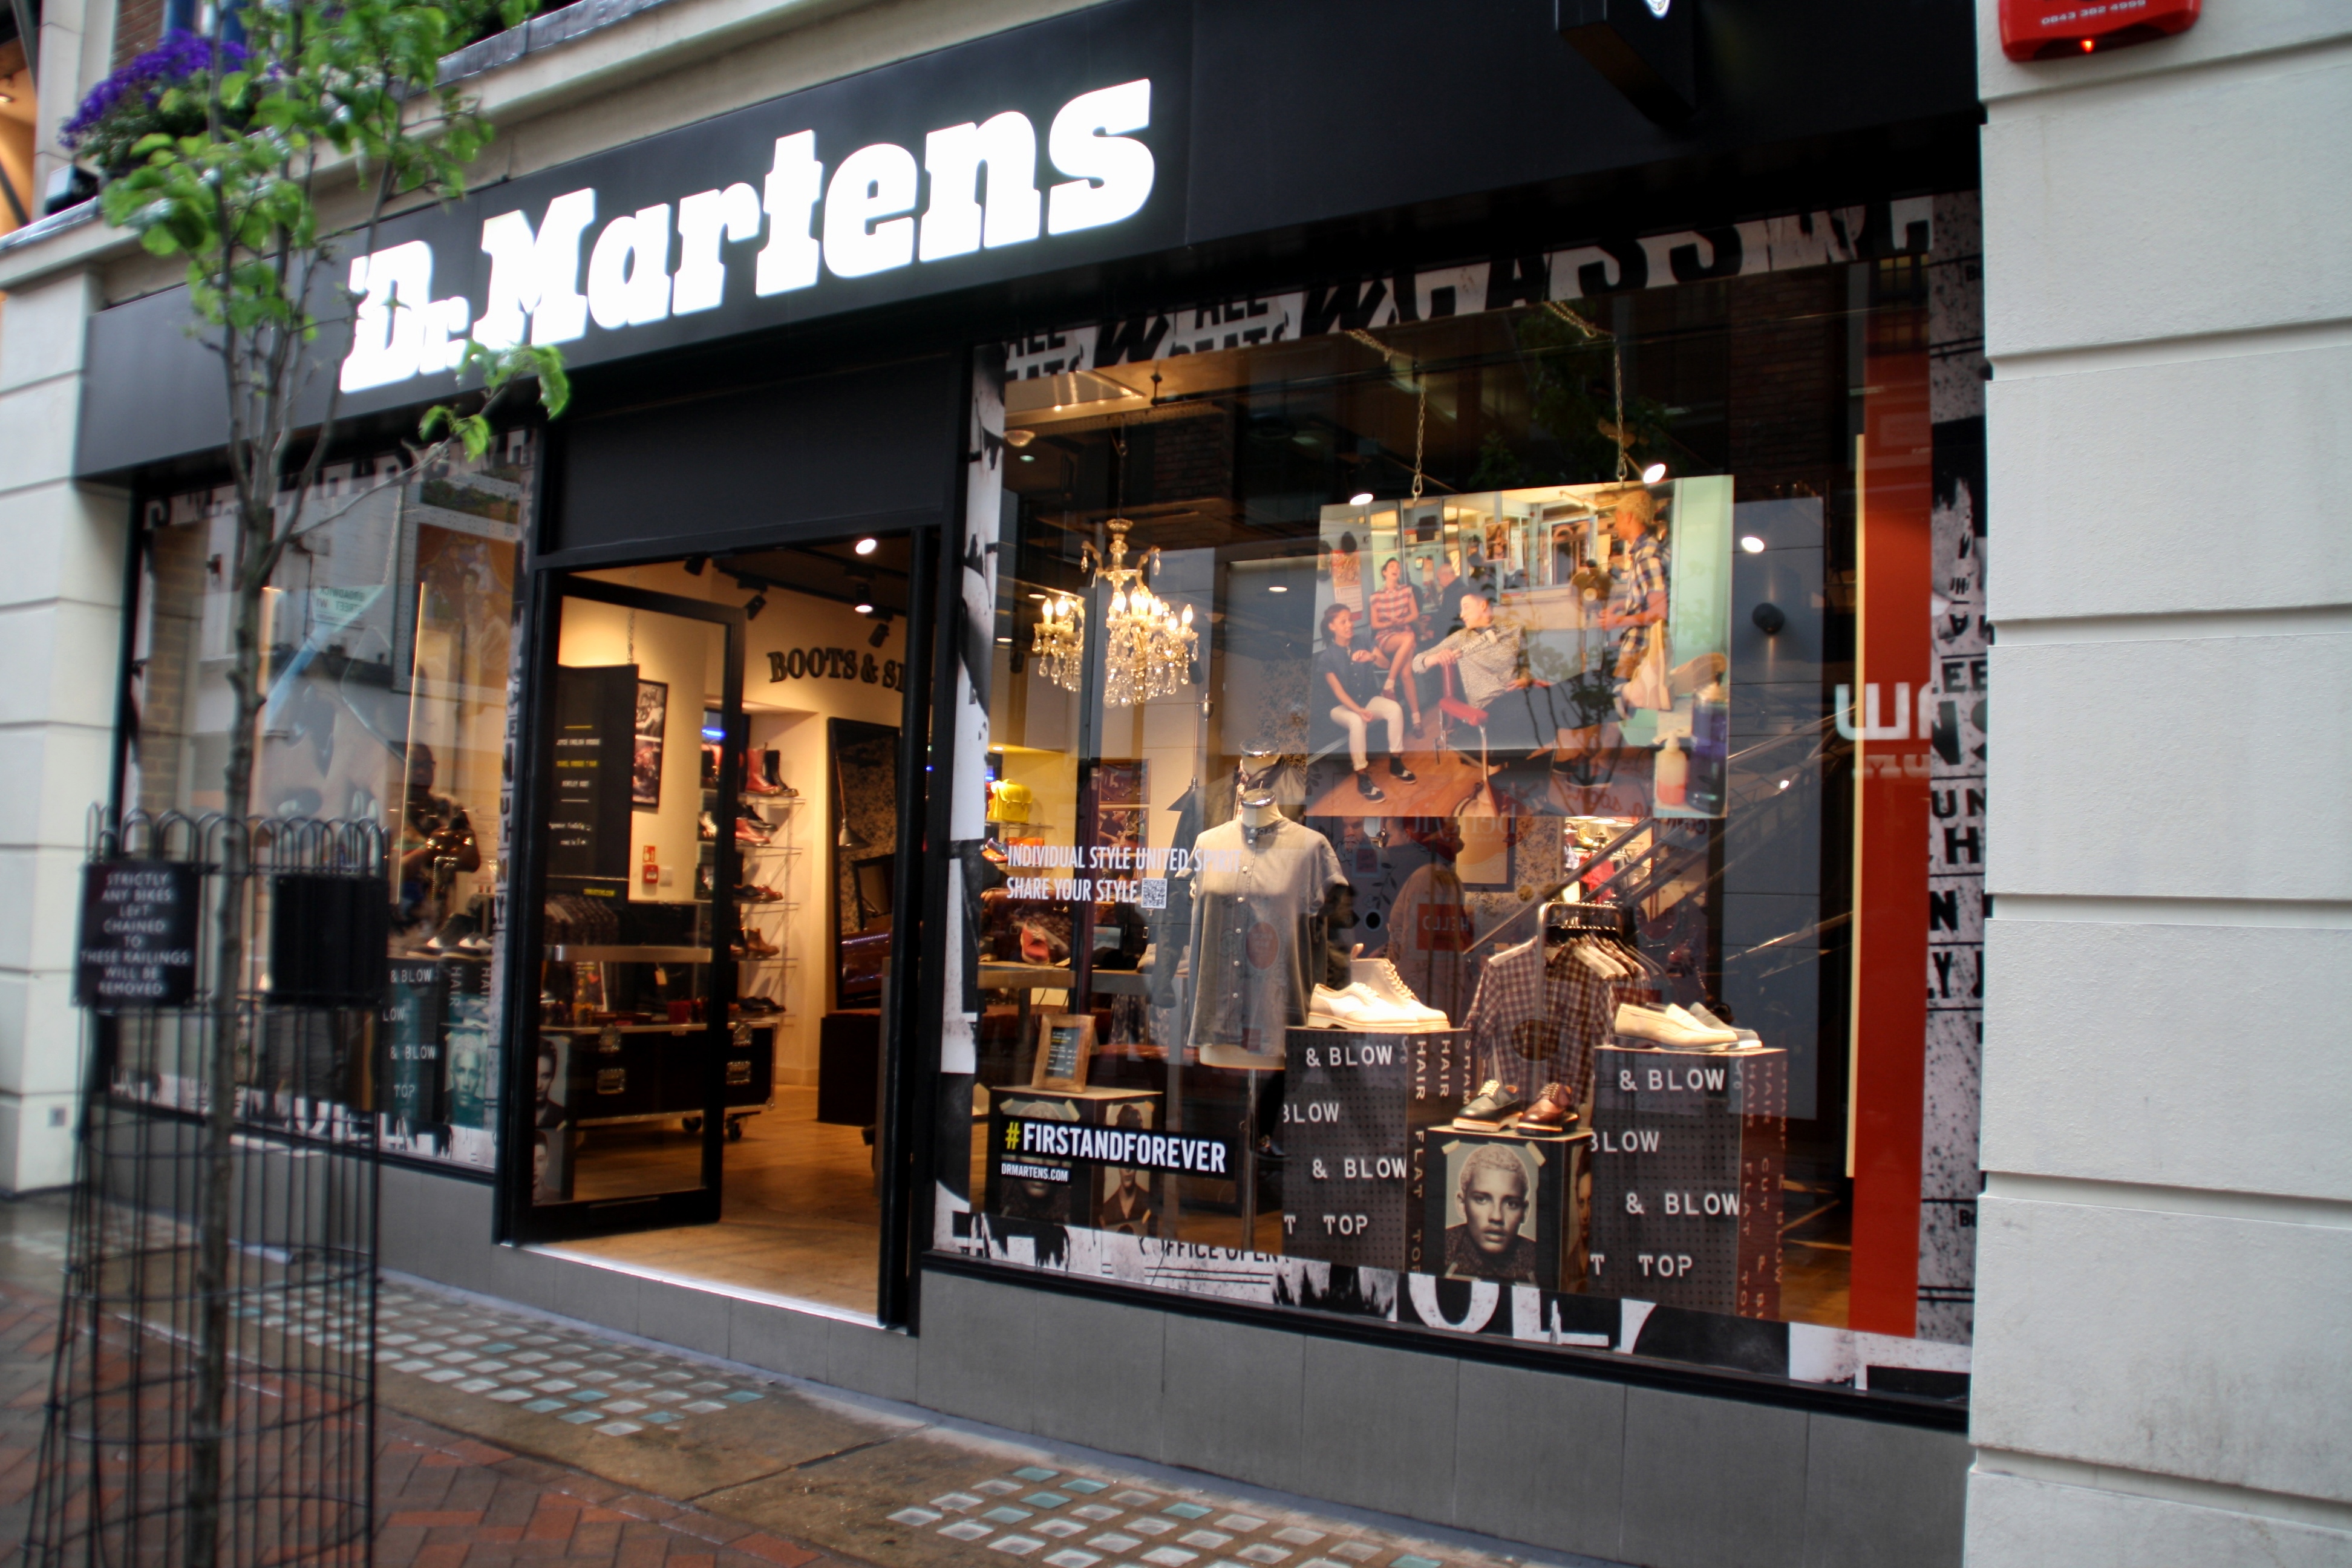 Store visit to Dr Martens, Carnaby Street – Bunnipunch